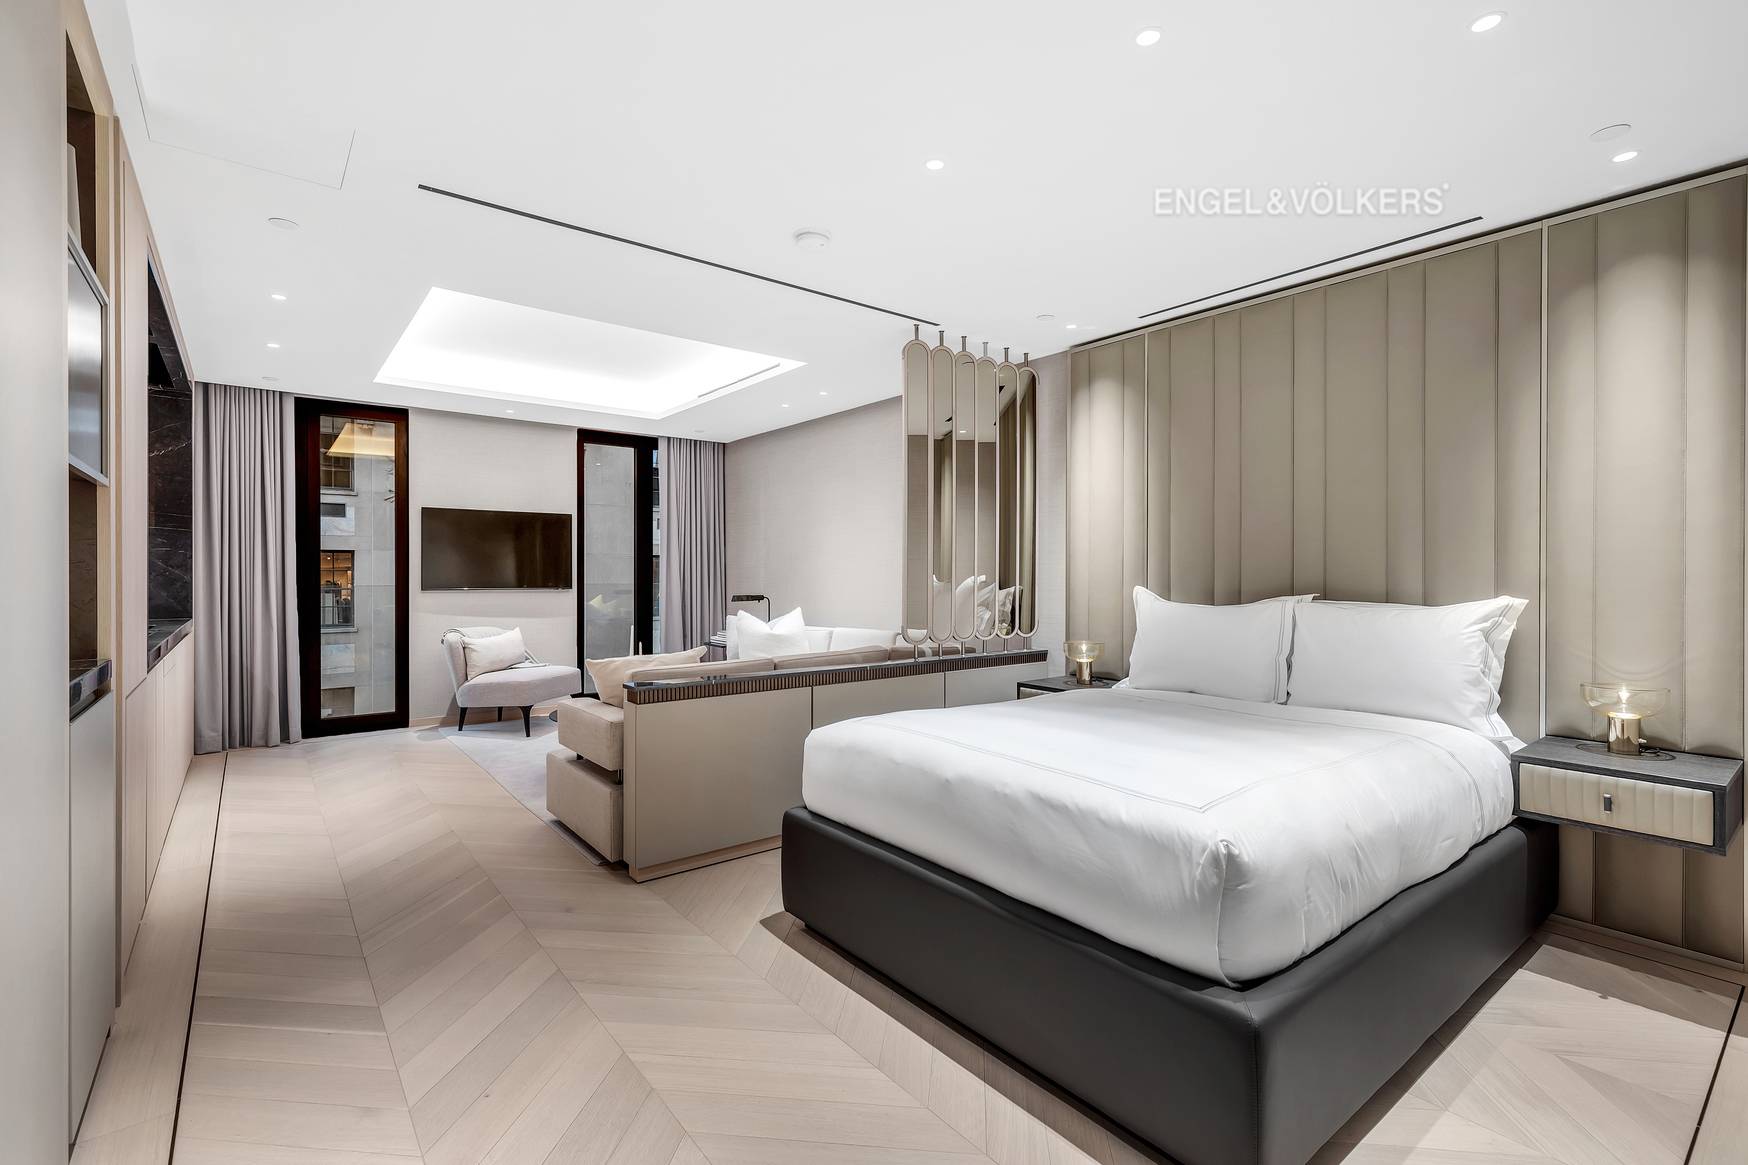 Great Opportunity for Luxury Hotel Living at Half the Price Introducing 10D, a meticulously appointed, fully furnished studio suite residence at Mandarin Oriental Fifth Avenue, renowned for exclusivity and security, ...